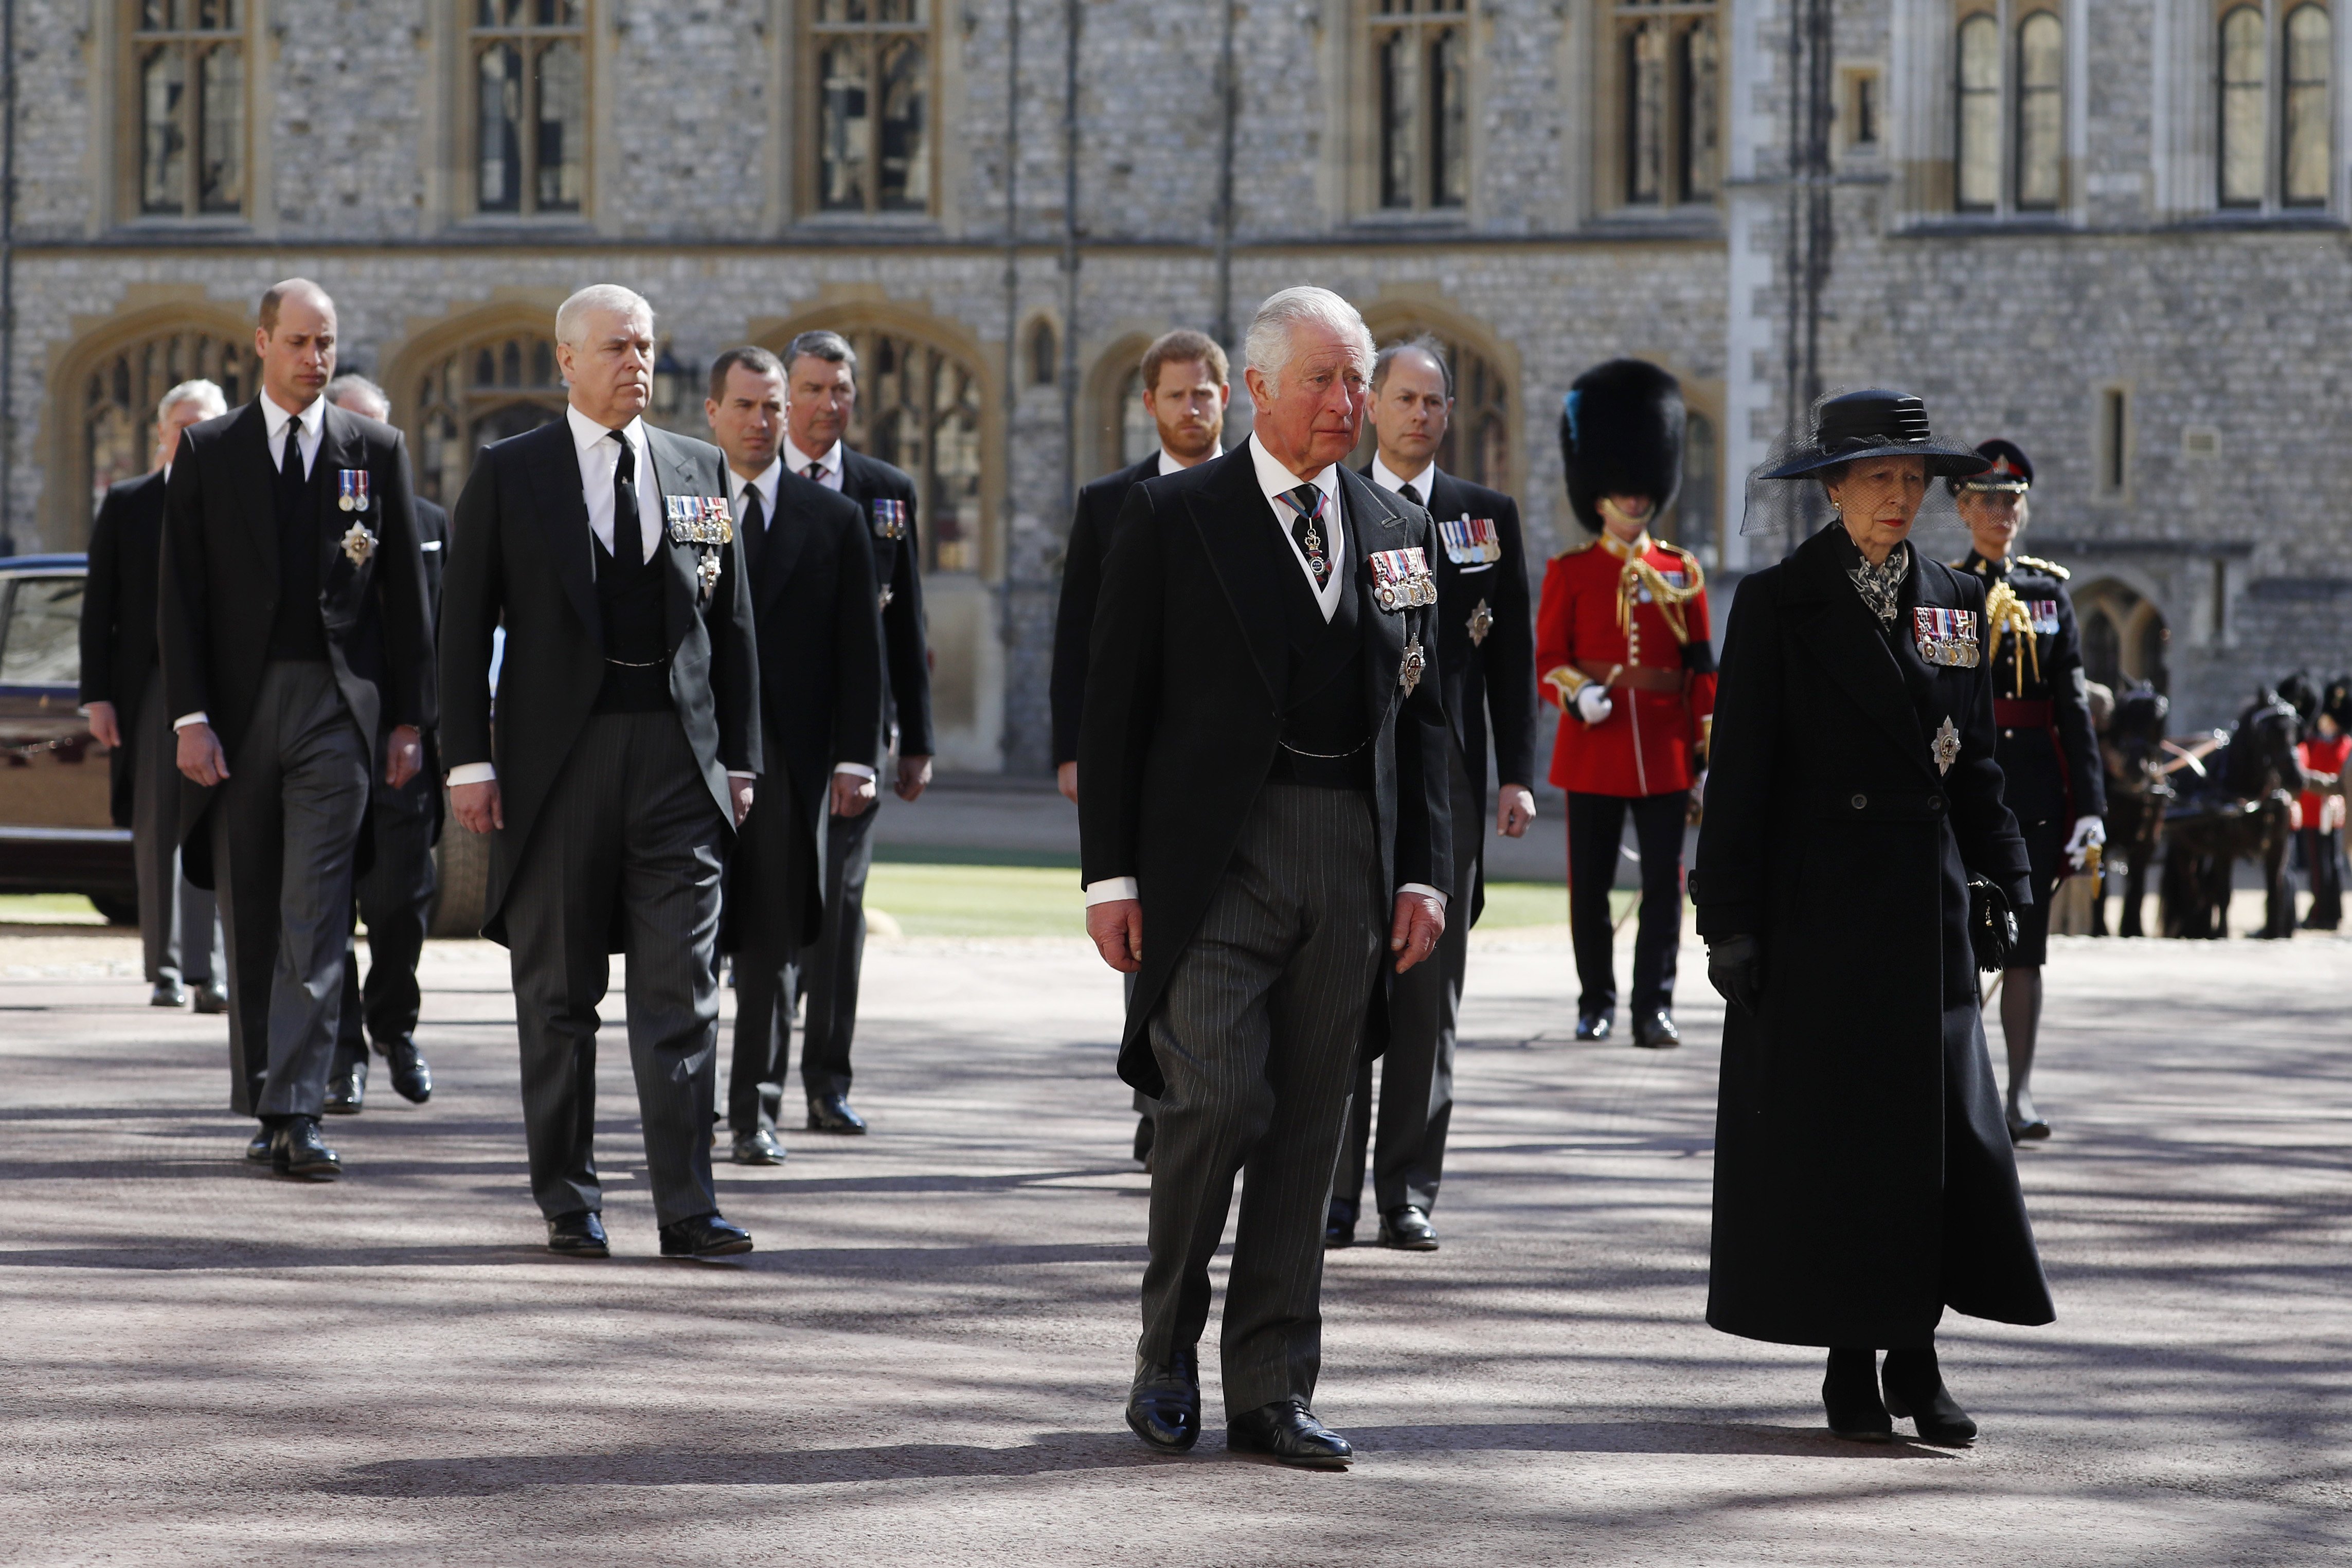 Princess Anne, Prince Charles, Prince Andrew, Prince Edward, Prince William, Peter Phillips, Prince Harry, Earl of Snowdon David Armstrong-Jones and Vice-Admiral Sir Timothy Laurence during the Ceremonial Procession during the funeral of Prince Philip, Duke of Edinburgh at Windsor Castle on April 17, 2021 in Windsor, England. / Source: Getty Images